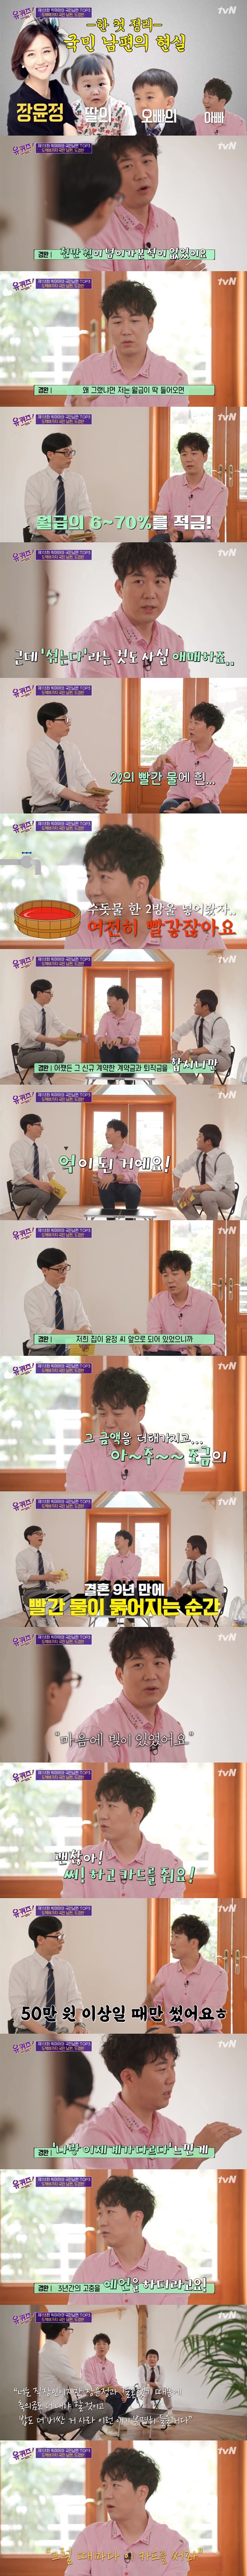 Broadcaster Do Kyoung-wan boasted a big face of his wife, singer Jang Yun-jeong, on You Quiz on the Block.Do Kyoung-wan appeared as a guest on the cable channel tvN You Quiz on the Block which was broadcast on the afternoon of June 30th.In particular, he revealed the use of KBS Severance package on this day and attracted attention.He joined KBS 35 as a public announcer in 2008 and left the company in February this year and turned to freelance and signed an exclusive contract with his agency Bliss Entertainment.Do Kyoung-wan said, I havent been an announcer for 12 years.I wrote to MC Yoo Jae-Suks question, Do you still have a Severance package in your account?Ive never been over 10 million won in my bankbook in my career, and I just saved 60 to 70 percent when my salary came in, he continued.Then, when I start a family, I have to mix my wife and my bankbook, but the expression mixing is also ambiguous. It is still red when I put two drops of transparent tap water in 2L red water.But I still laughed, saying, Someday it will be done, and mixed it. Do Kyoung-wan said, Just the Severance package came in, and it was the first time this amount was taken.The amount is not large, but the contract amount of the agency is combined, so it has become a billion won. Since the house was in front of Jang Yun-jeong, I added that amount and got a little share of the house.I have been in debt to my heart, he confessed.Do Kyoung-wan said, Is not Jang Yun-jeong big?, My wife gave me a card saying Its okay, write.How do I use that card? He said, I only used it when it was over 500,000 won. I bought it when I ate pork. Do Kyoung-wan said, I heard that Jang Yun-jeong did not even announce the card usage details. My wife has already been a big person since I got married.I felt like I was different from the system. He said: Jang Yun-jeong married and at the same time predicted the grievances I would feel for three years, and it really happened.You are an office worker, but because you married Jang Yun-jeong, you will pay more money and rice is more expensive. I would definitely hear this.I gave him a card to write every time he did that. I do not want to drink it and buy clothes. Do Kyoung-wan married Jang Yun-jeong in 2013 and has one male and one female.